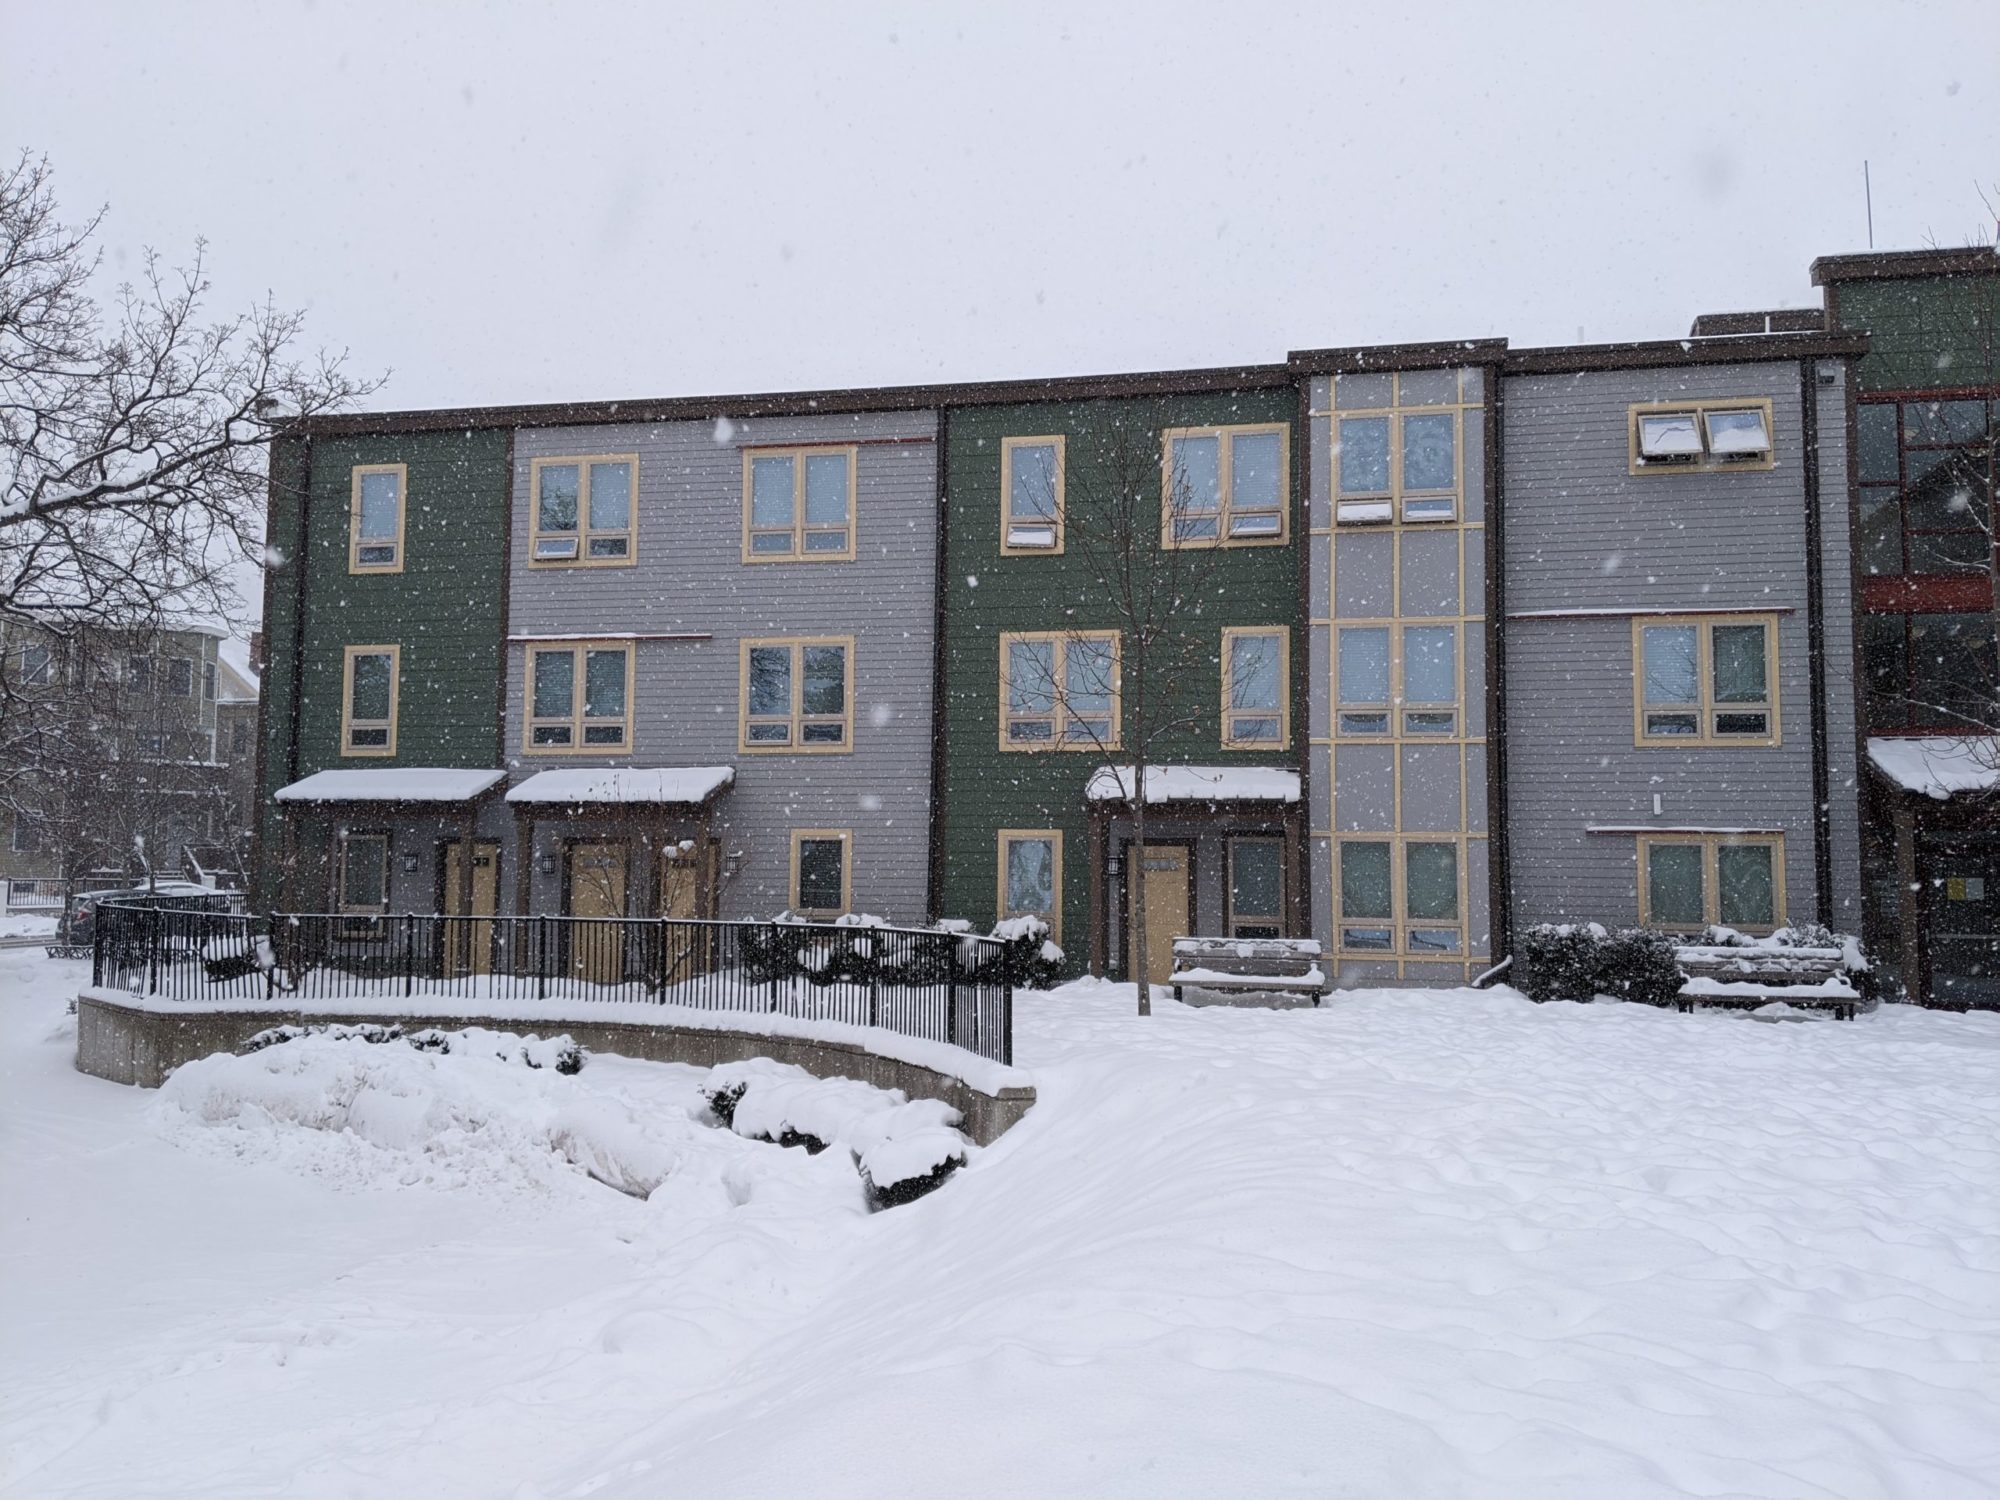 A straight on view of different attached condos. It is unclear where one home ends and another begins due to varying color, alternating between grey and green, and varying location of windows and front doors. There are three awnings in view. The courtyard area and all bushes and benches in view are covered in snow. A curved fence cuts through the left side of the yard.